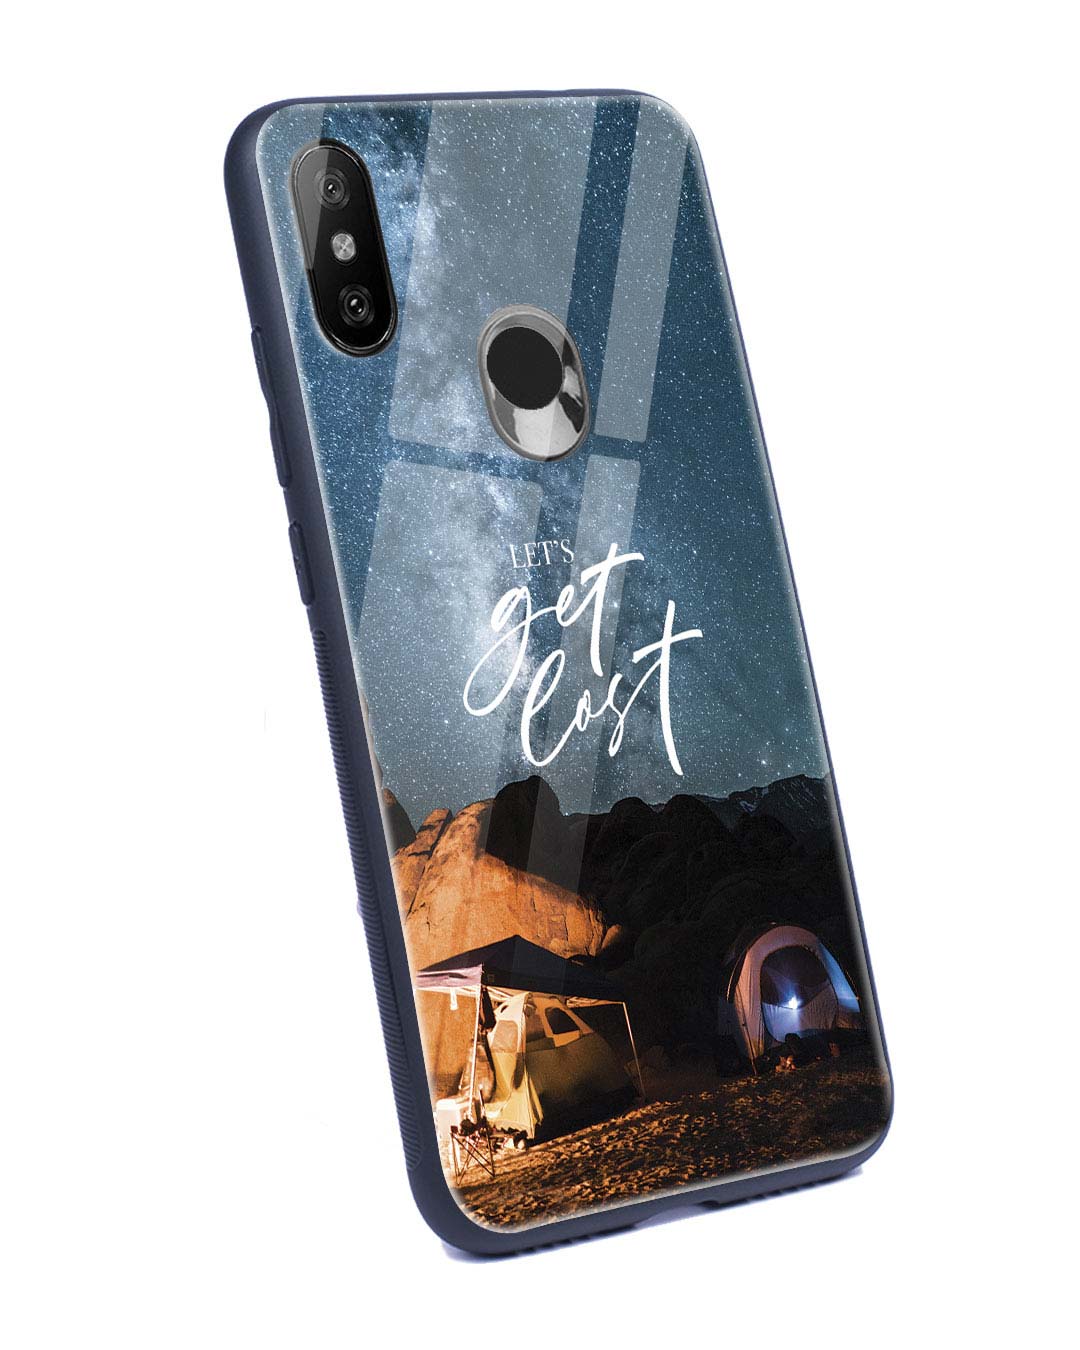 Shop Lets Get Lost Space Xiaomi Redmi Note 6 Pro Glass Mobile Cover-Back